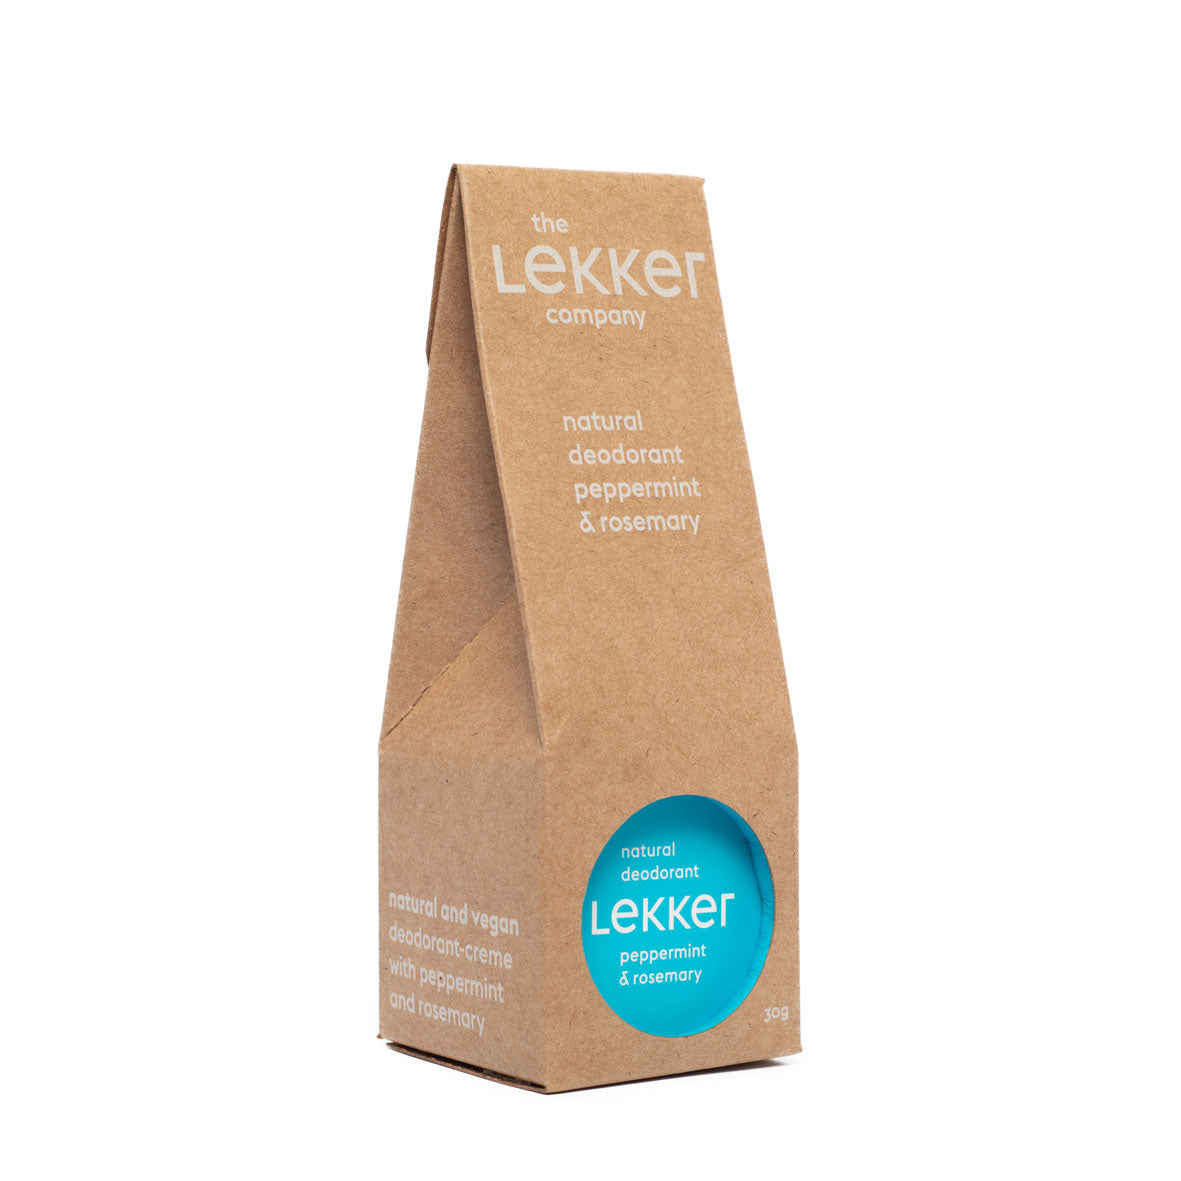 The Lekker Company Natural Deodorant Peppermint and Rosemary with Packaging